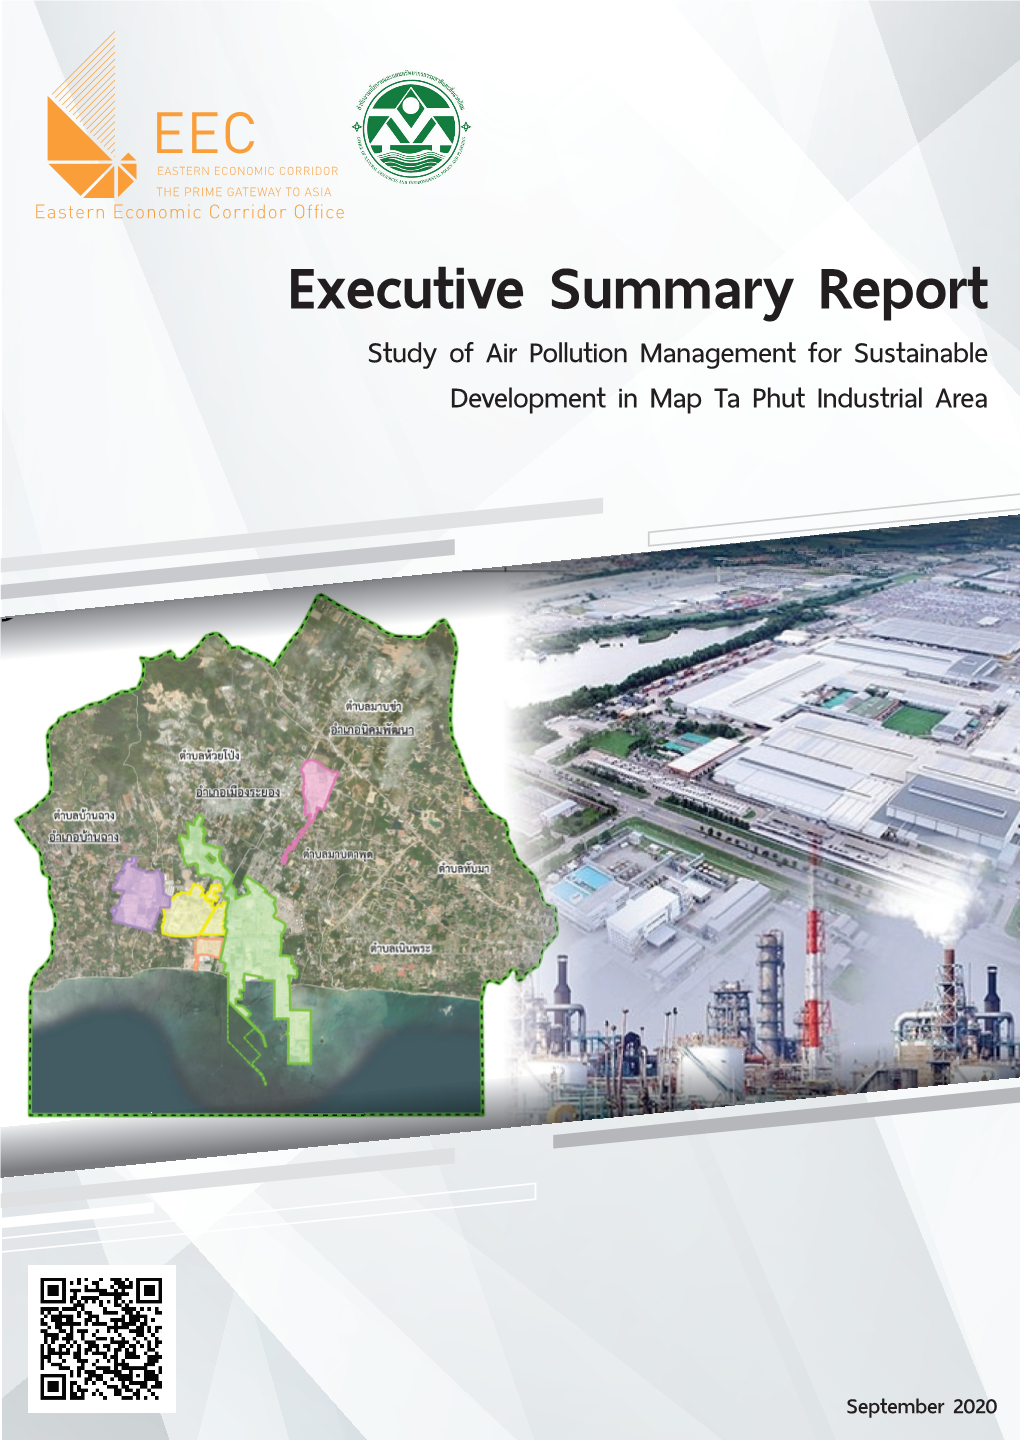 Executive Summary Report Study of Air Pollution Management for Sustainable Development in Map Ta Phut Industrial Area